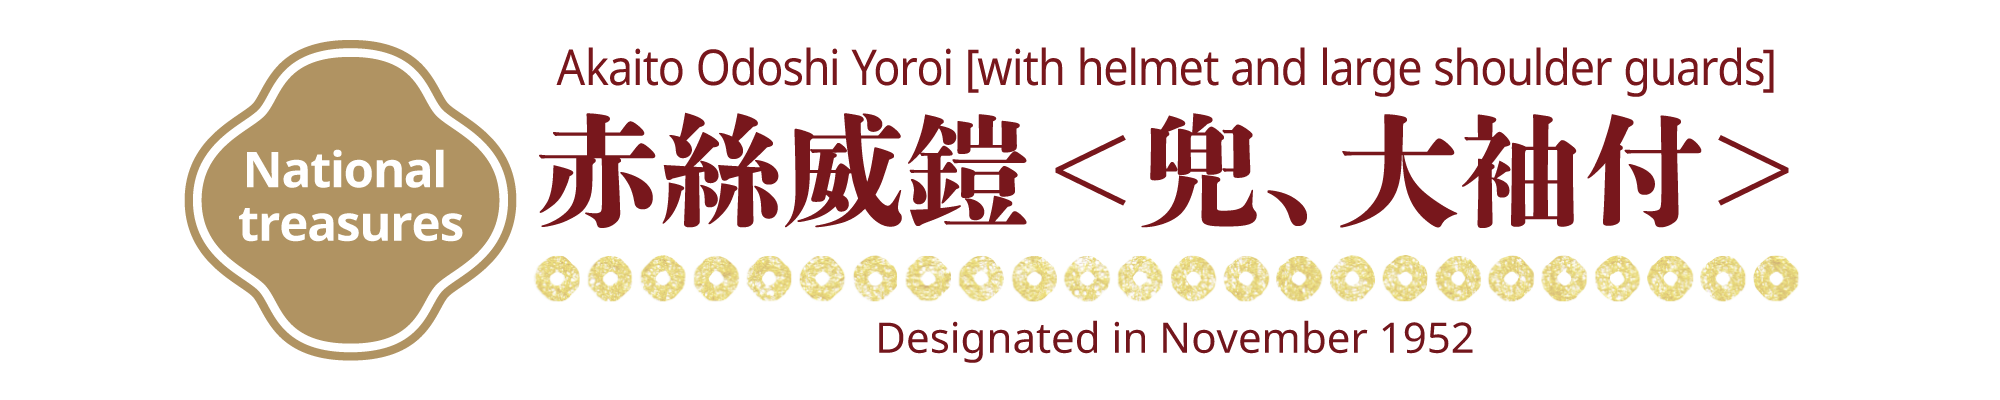 [National treasures] Akaito Odoshi Yoroi [with helmet and large shoulder guards], Designated in November 1952